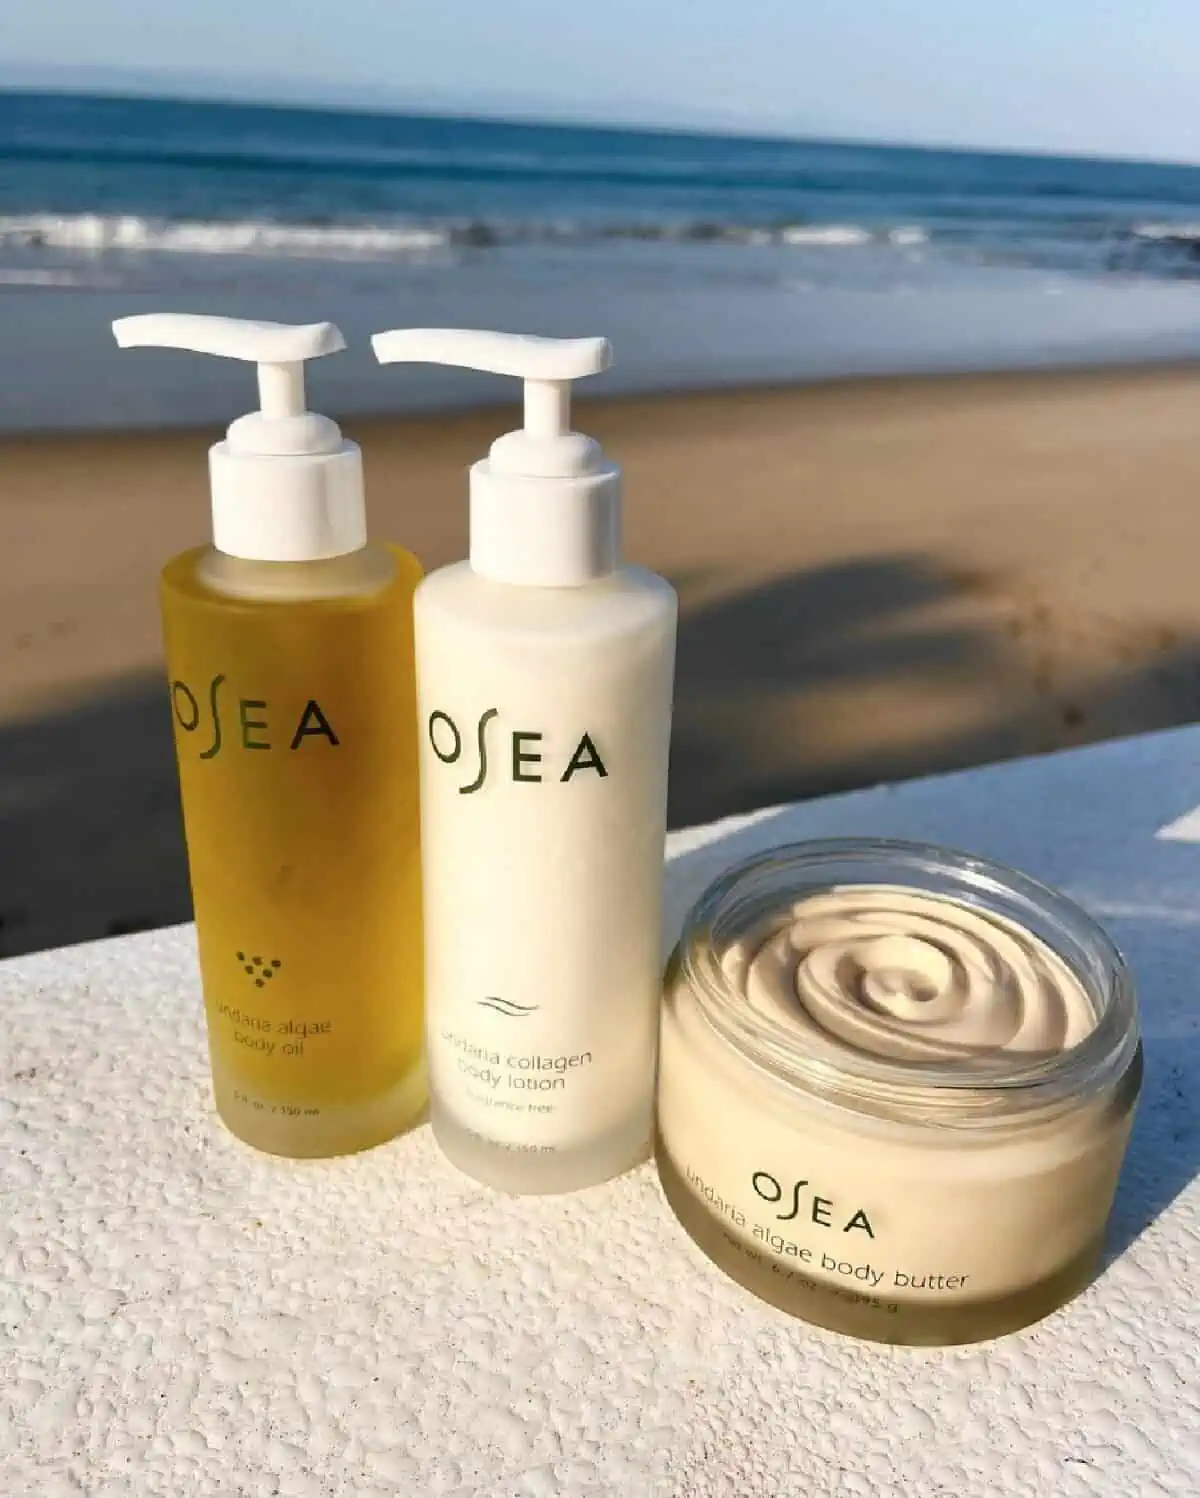 Two glass bottles of Osea oil and lotion with white pump tops and standing next to a jar of cream in front of a beach setting. 